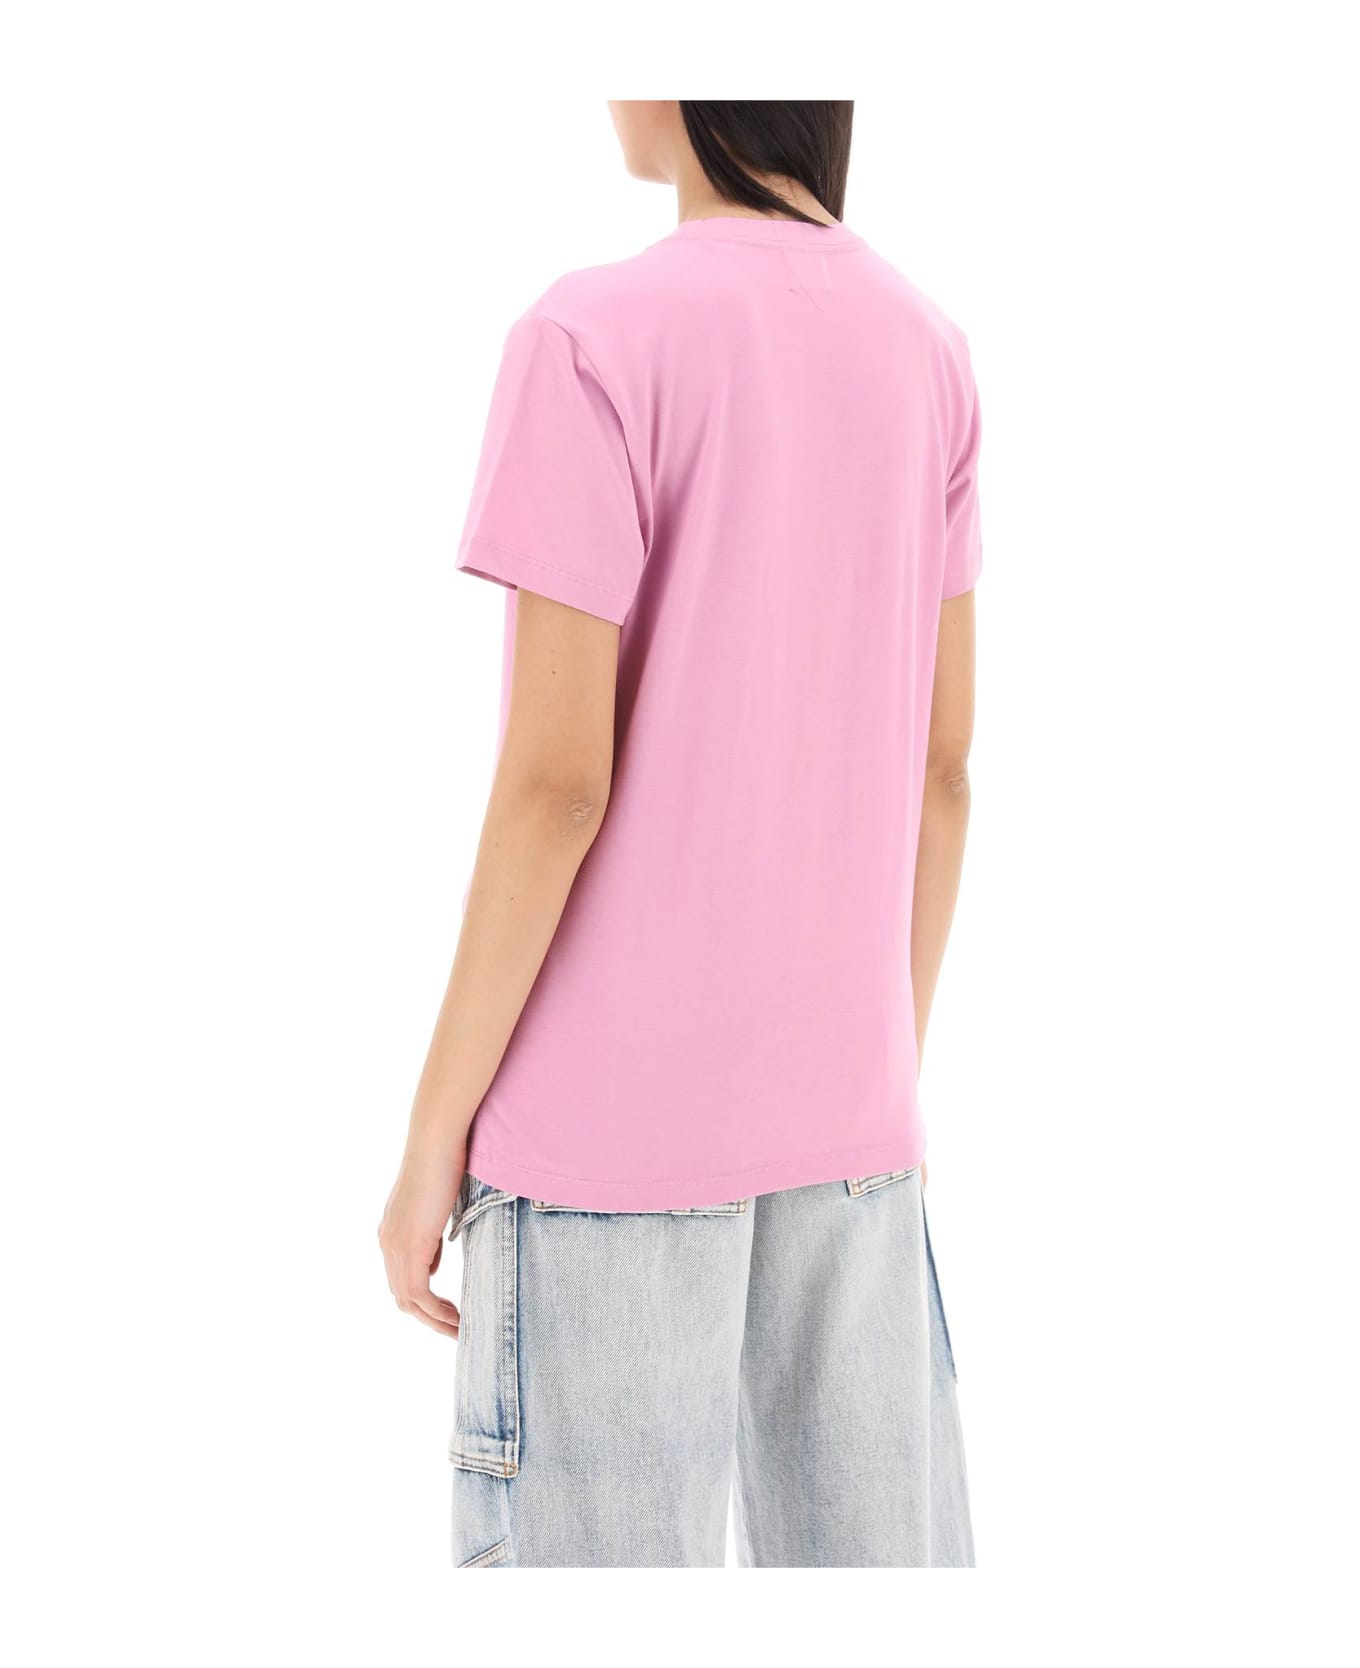 Marant Étoile Aby Regular Fit T-shirt - Candy Pink Tシャツ